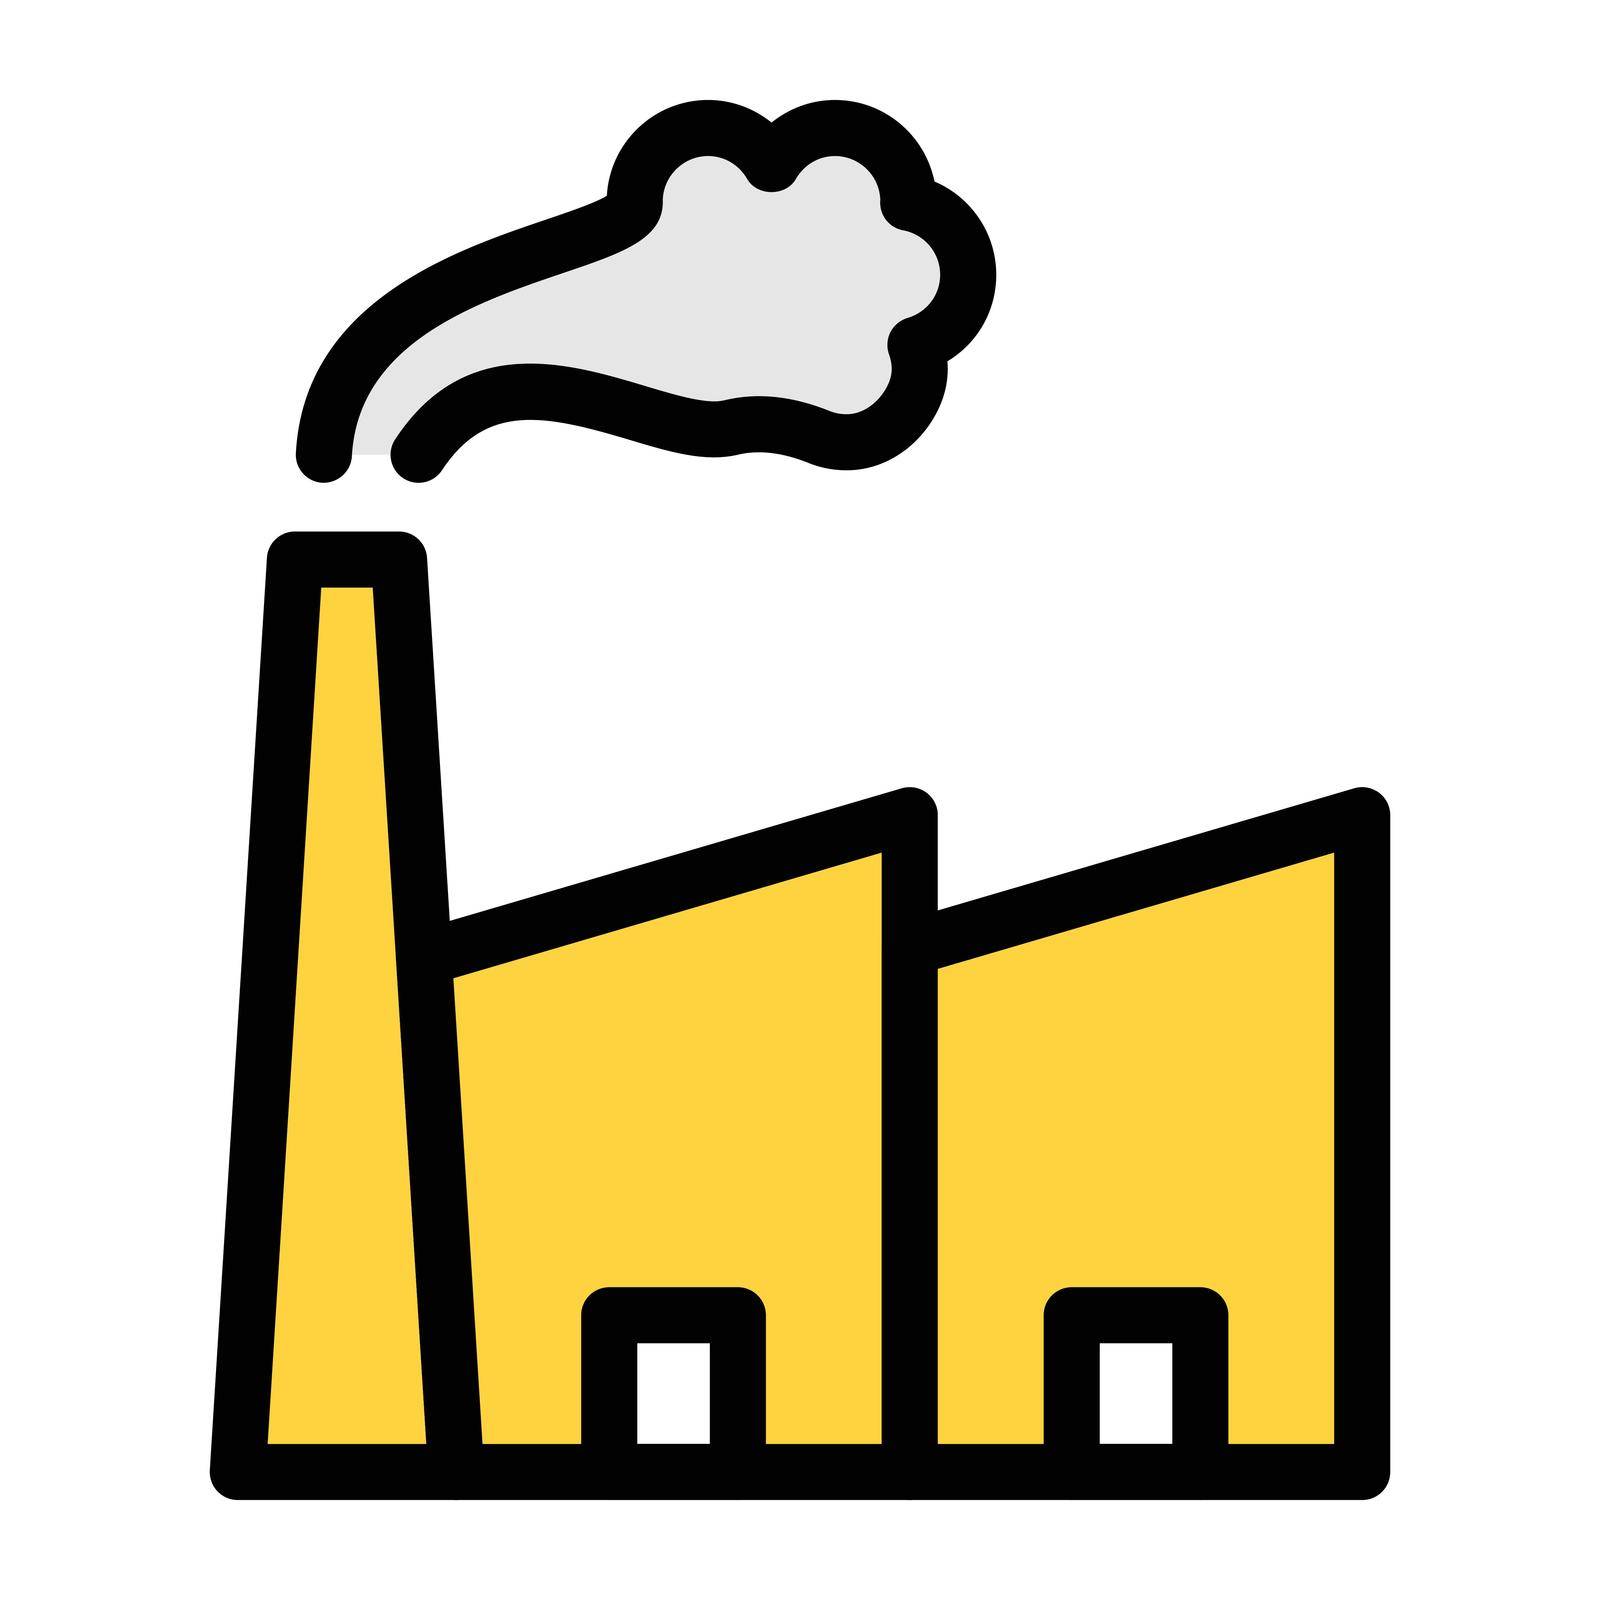 factory by FlaticonsDesign